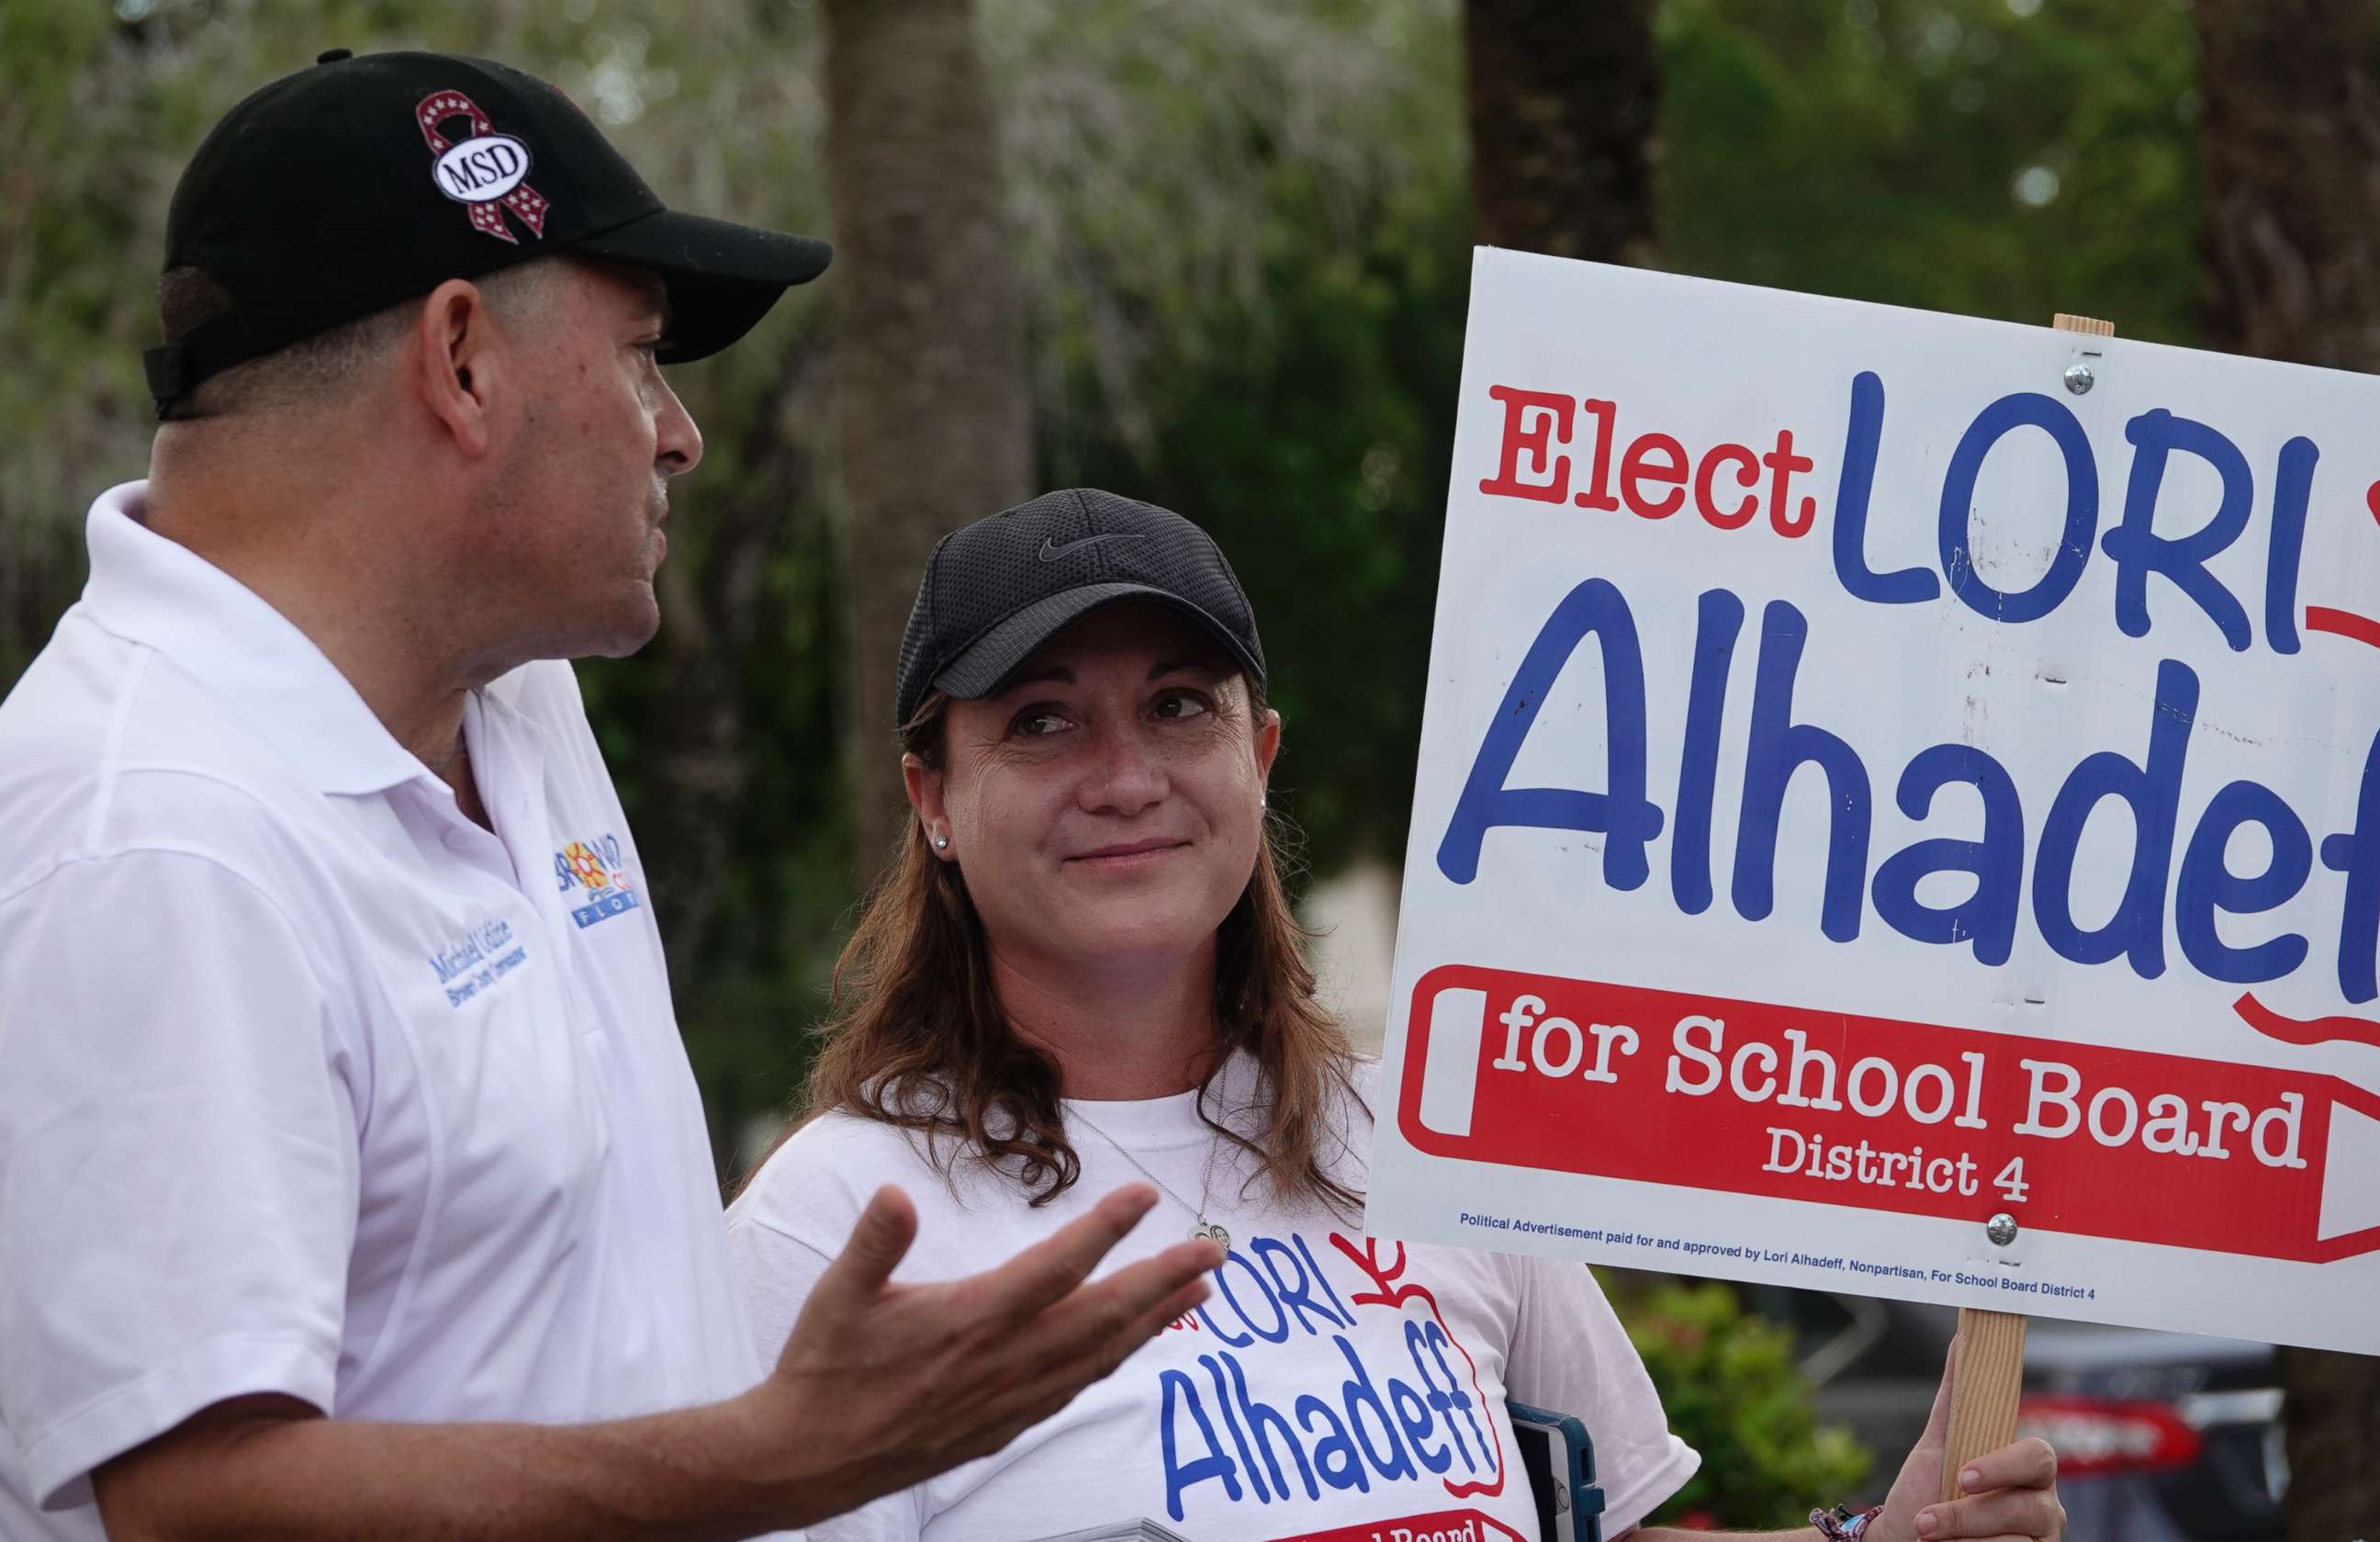 PHOTO: Lori Alhadeff speaks with County Commissioner Michael Udine at a polling place in Tamarac, Fla., Aug. 28, 2018.